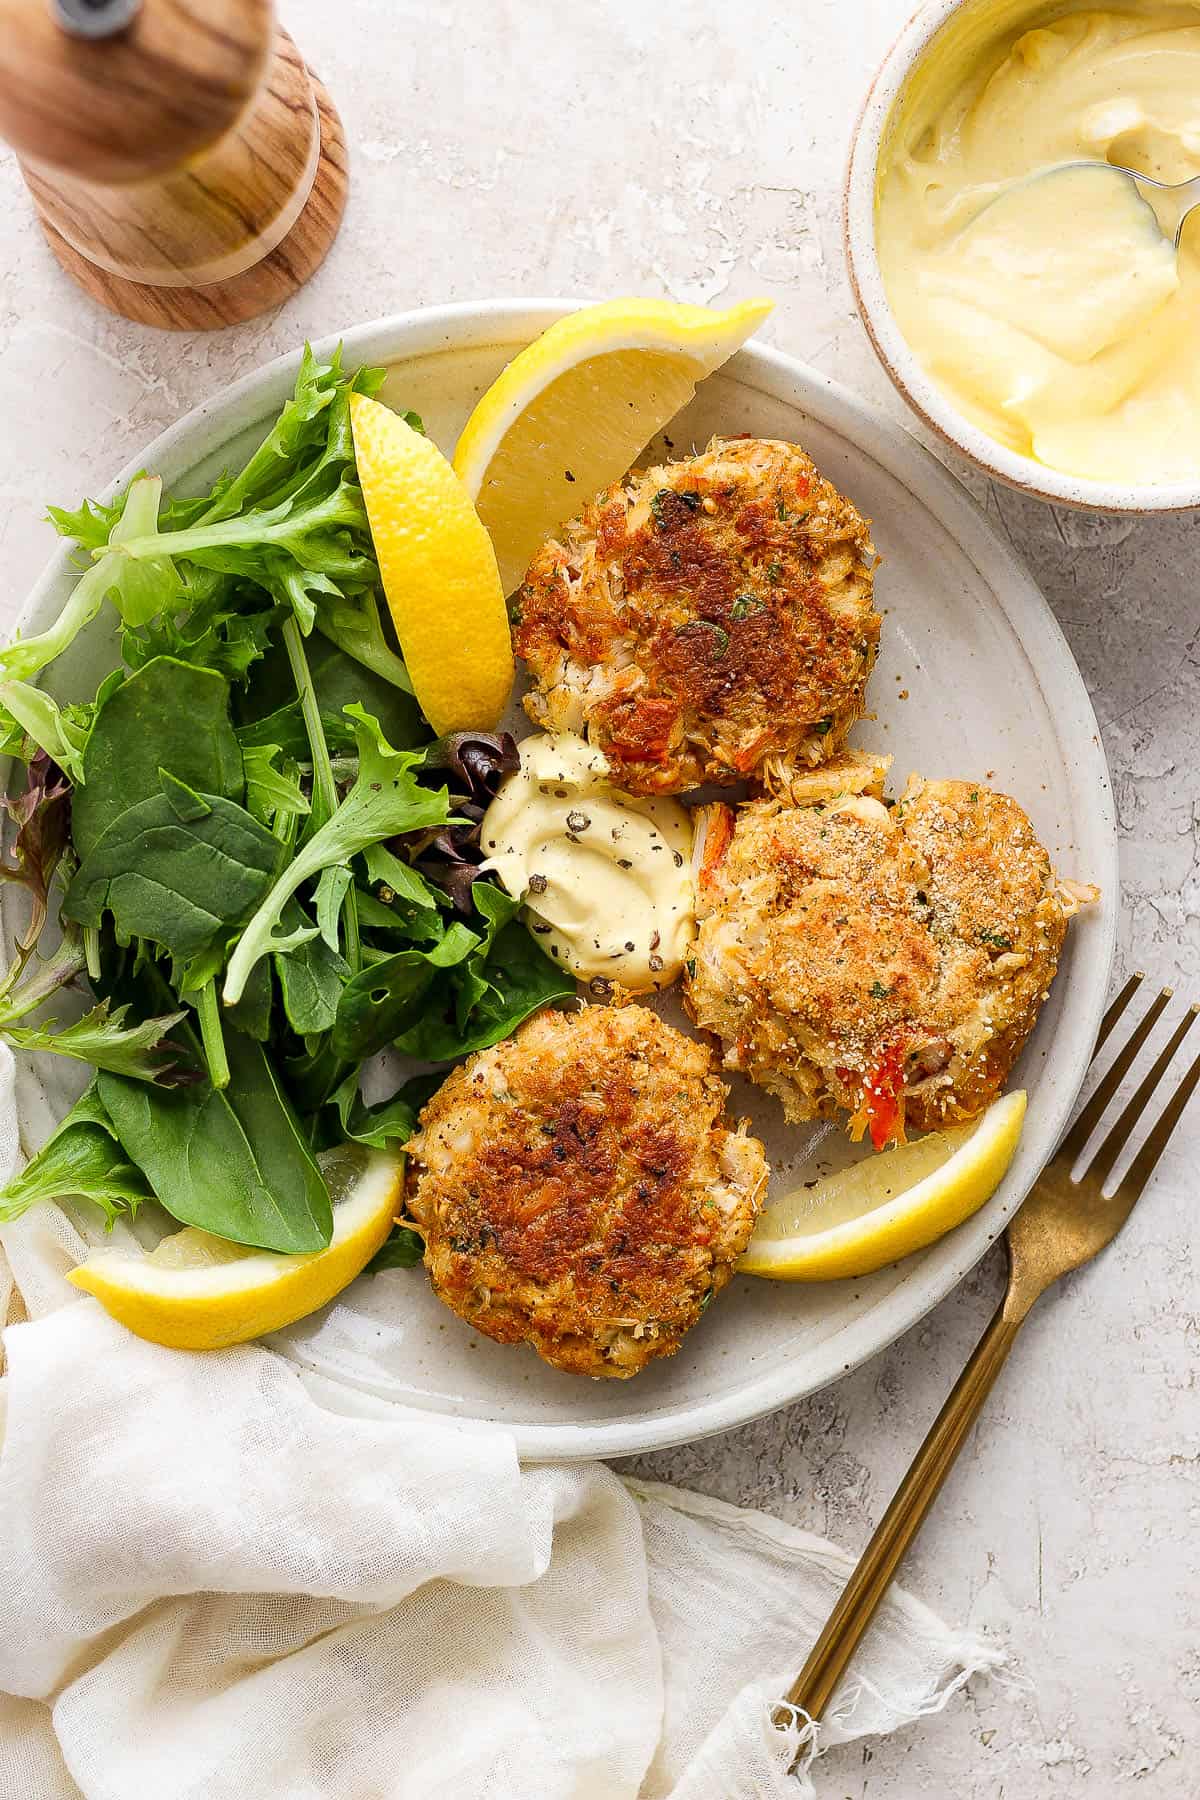 Crab Cakes - The Wooden Skillet